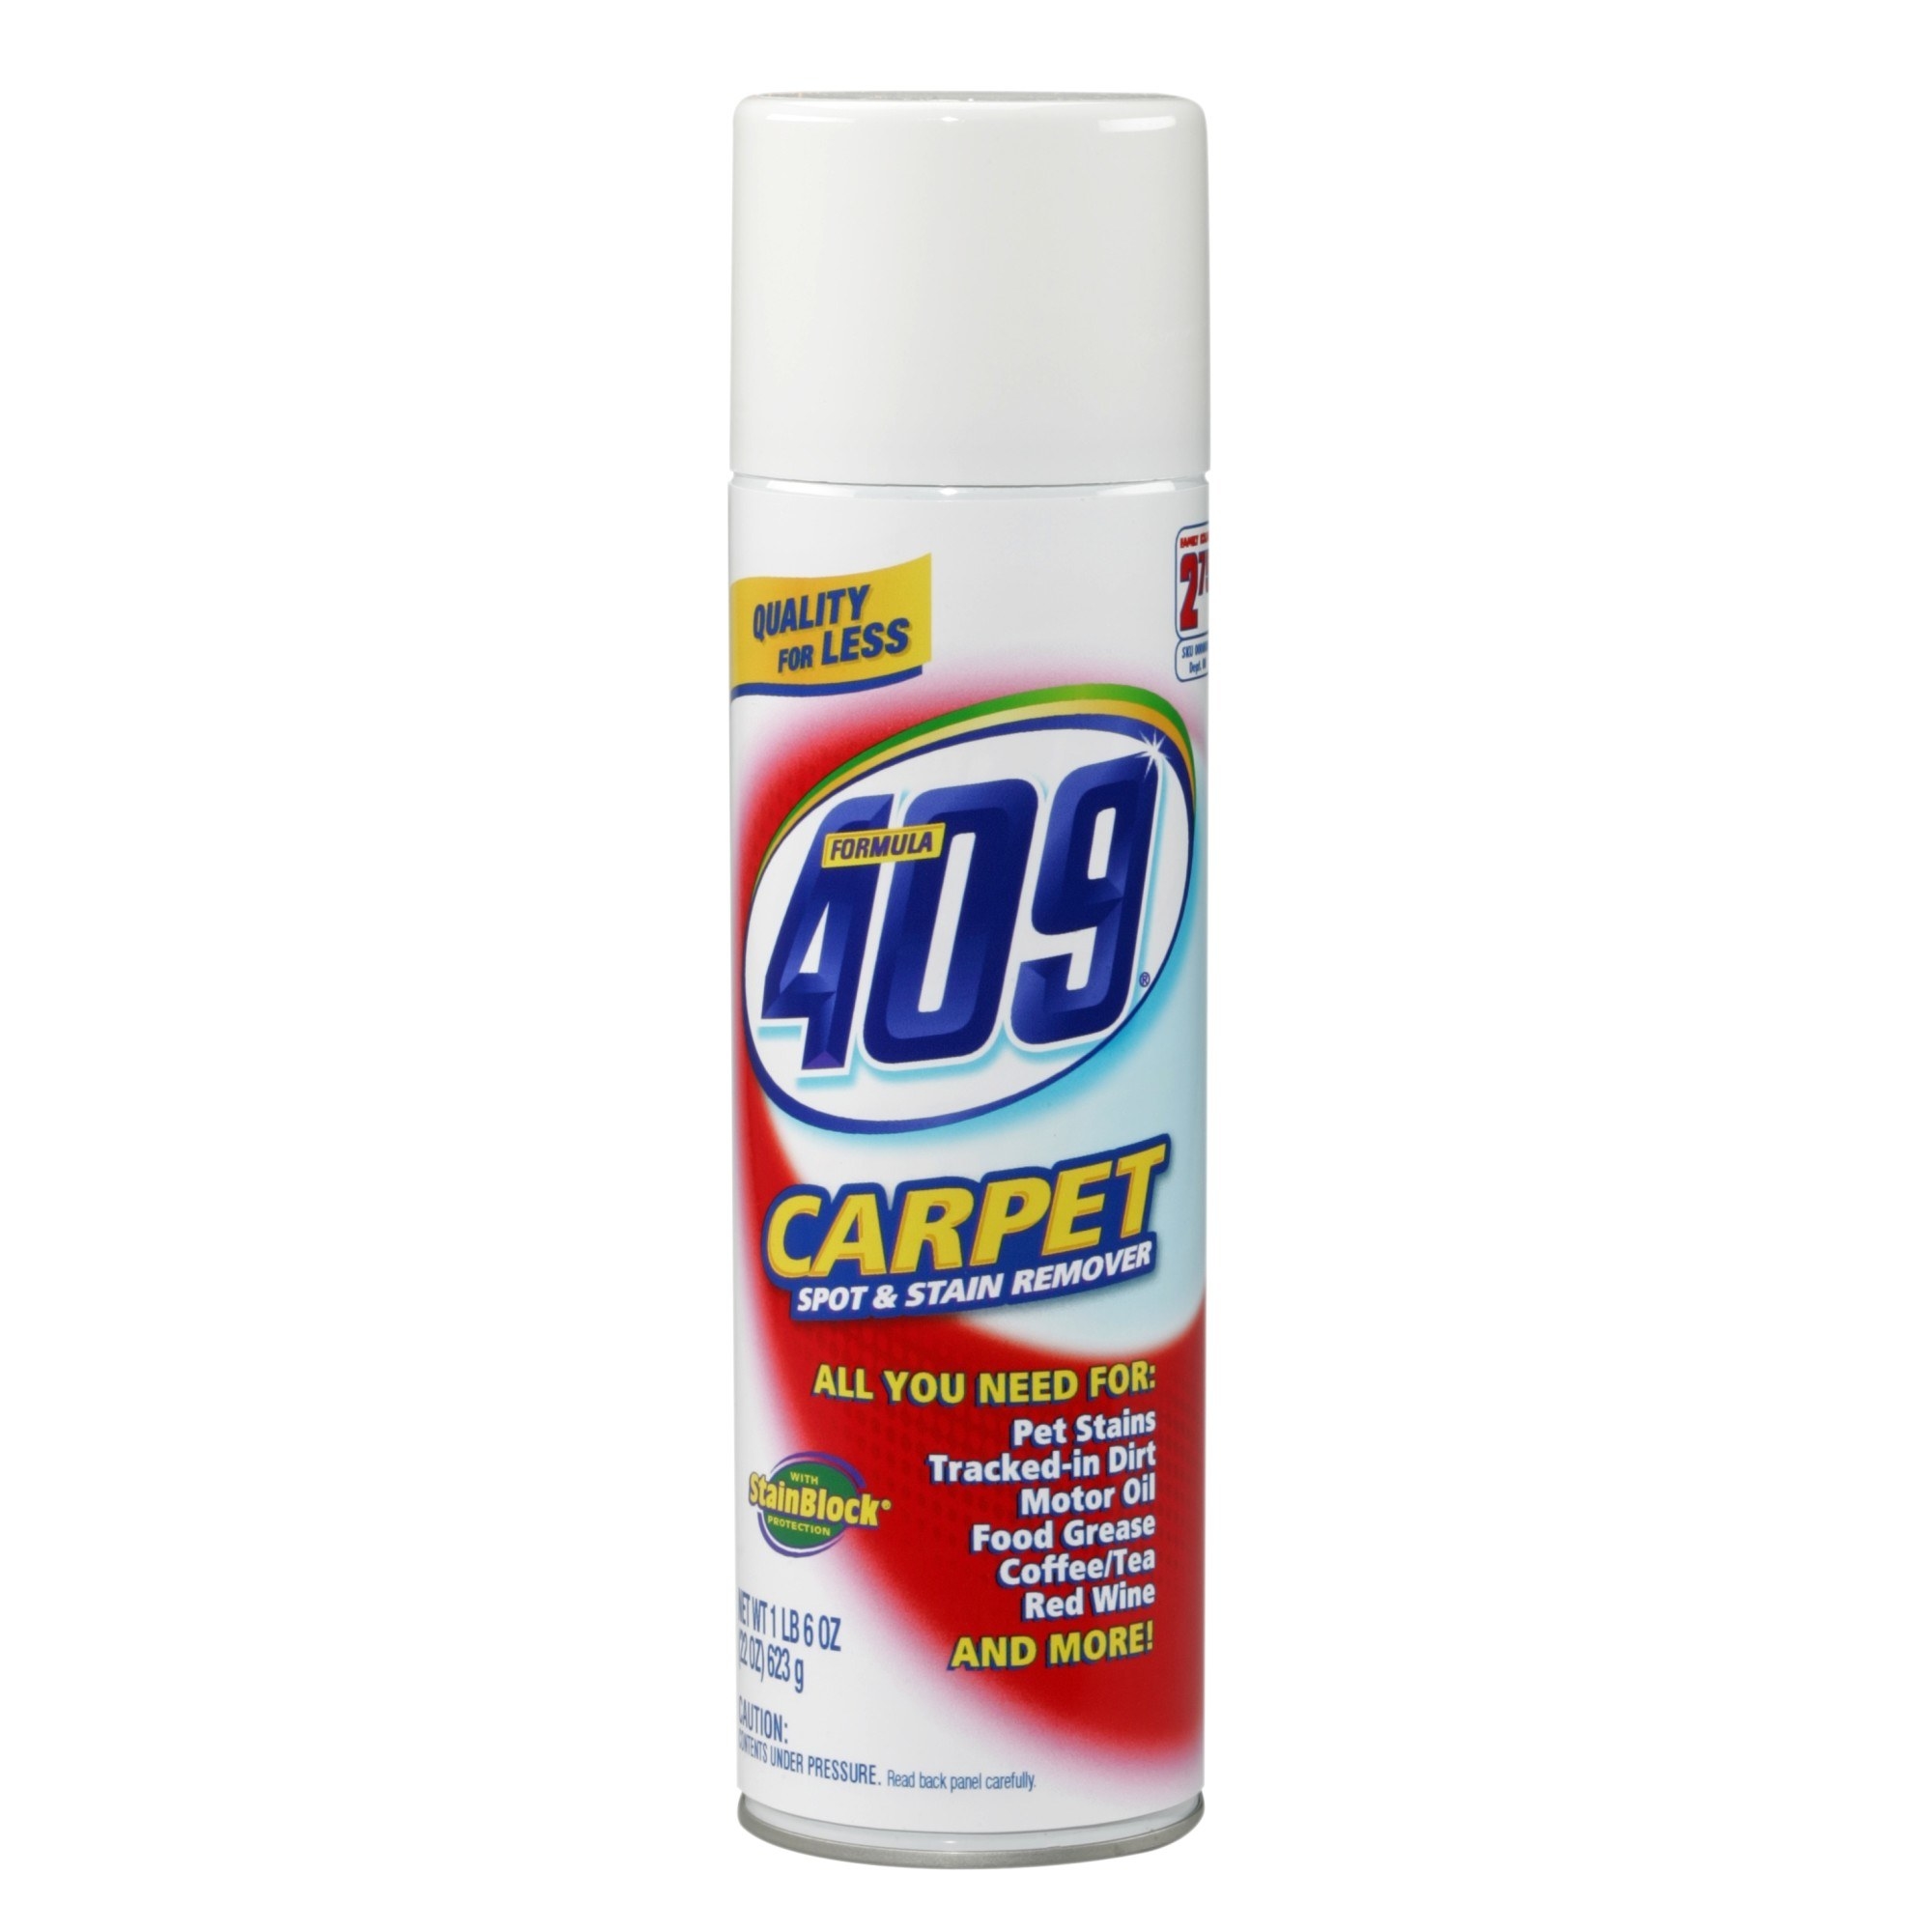 The can of carpet cleaner 